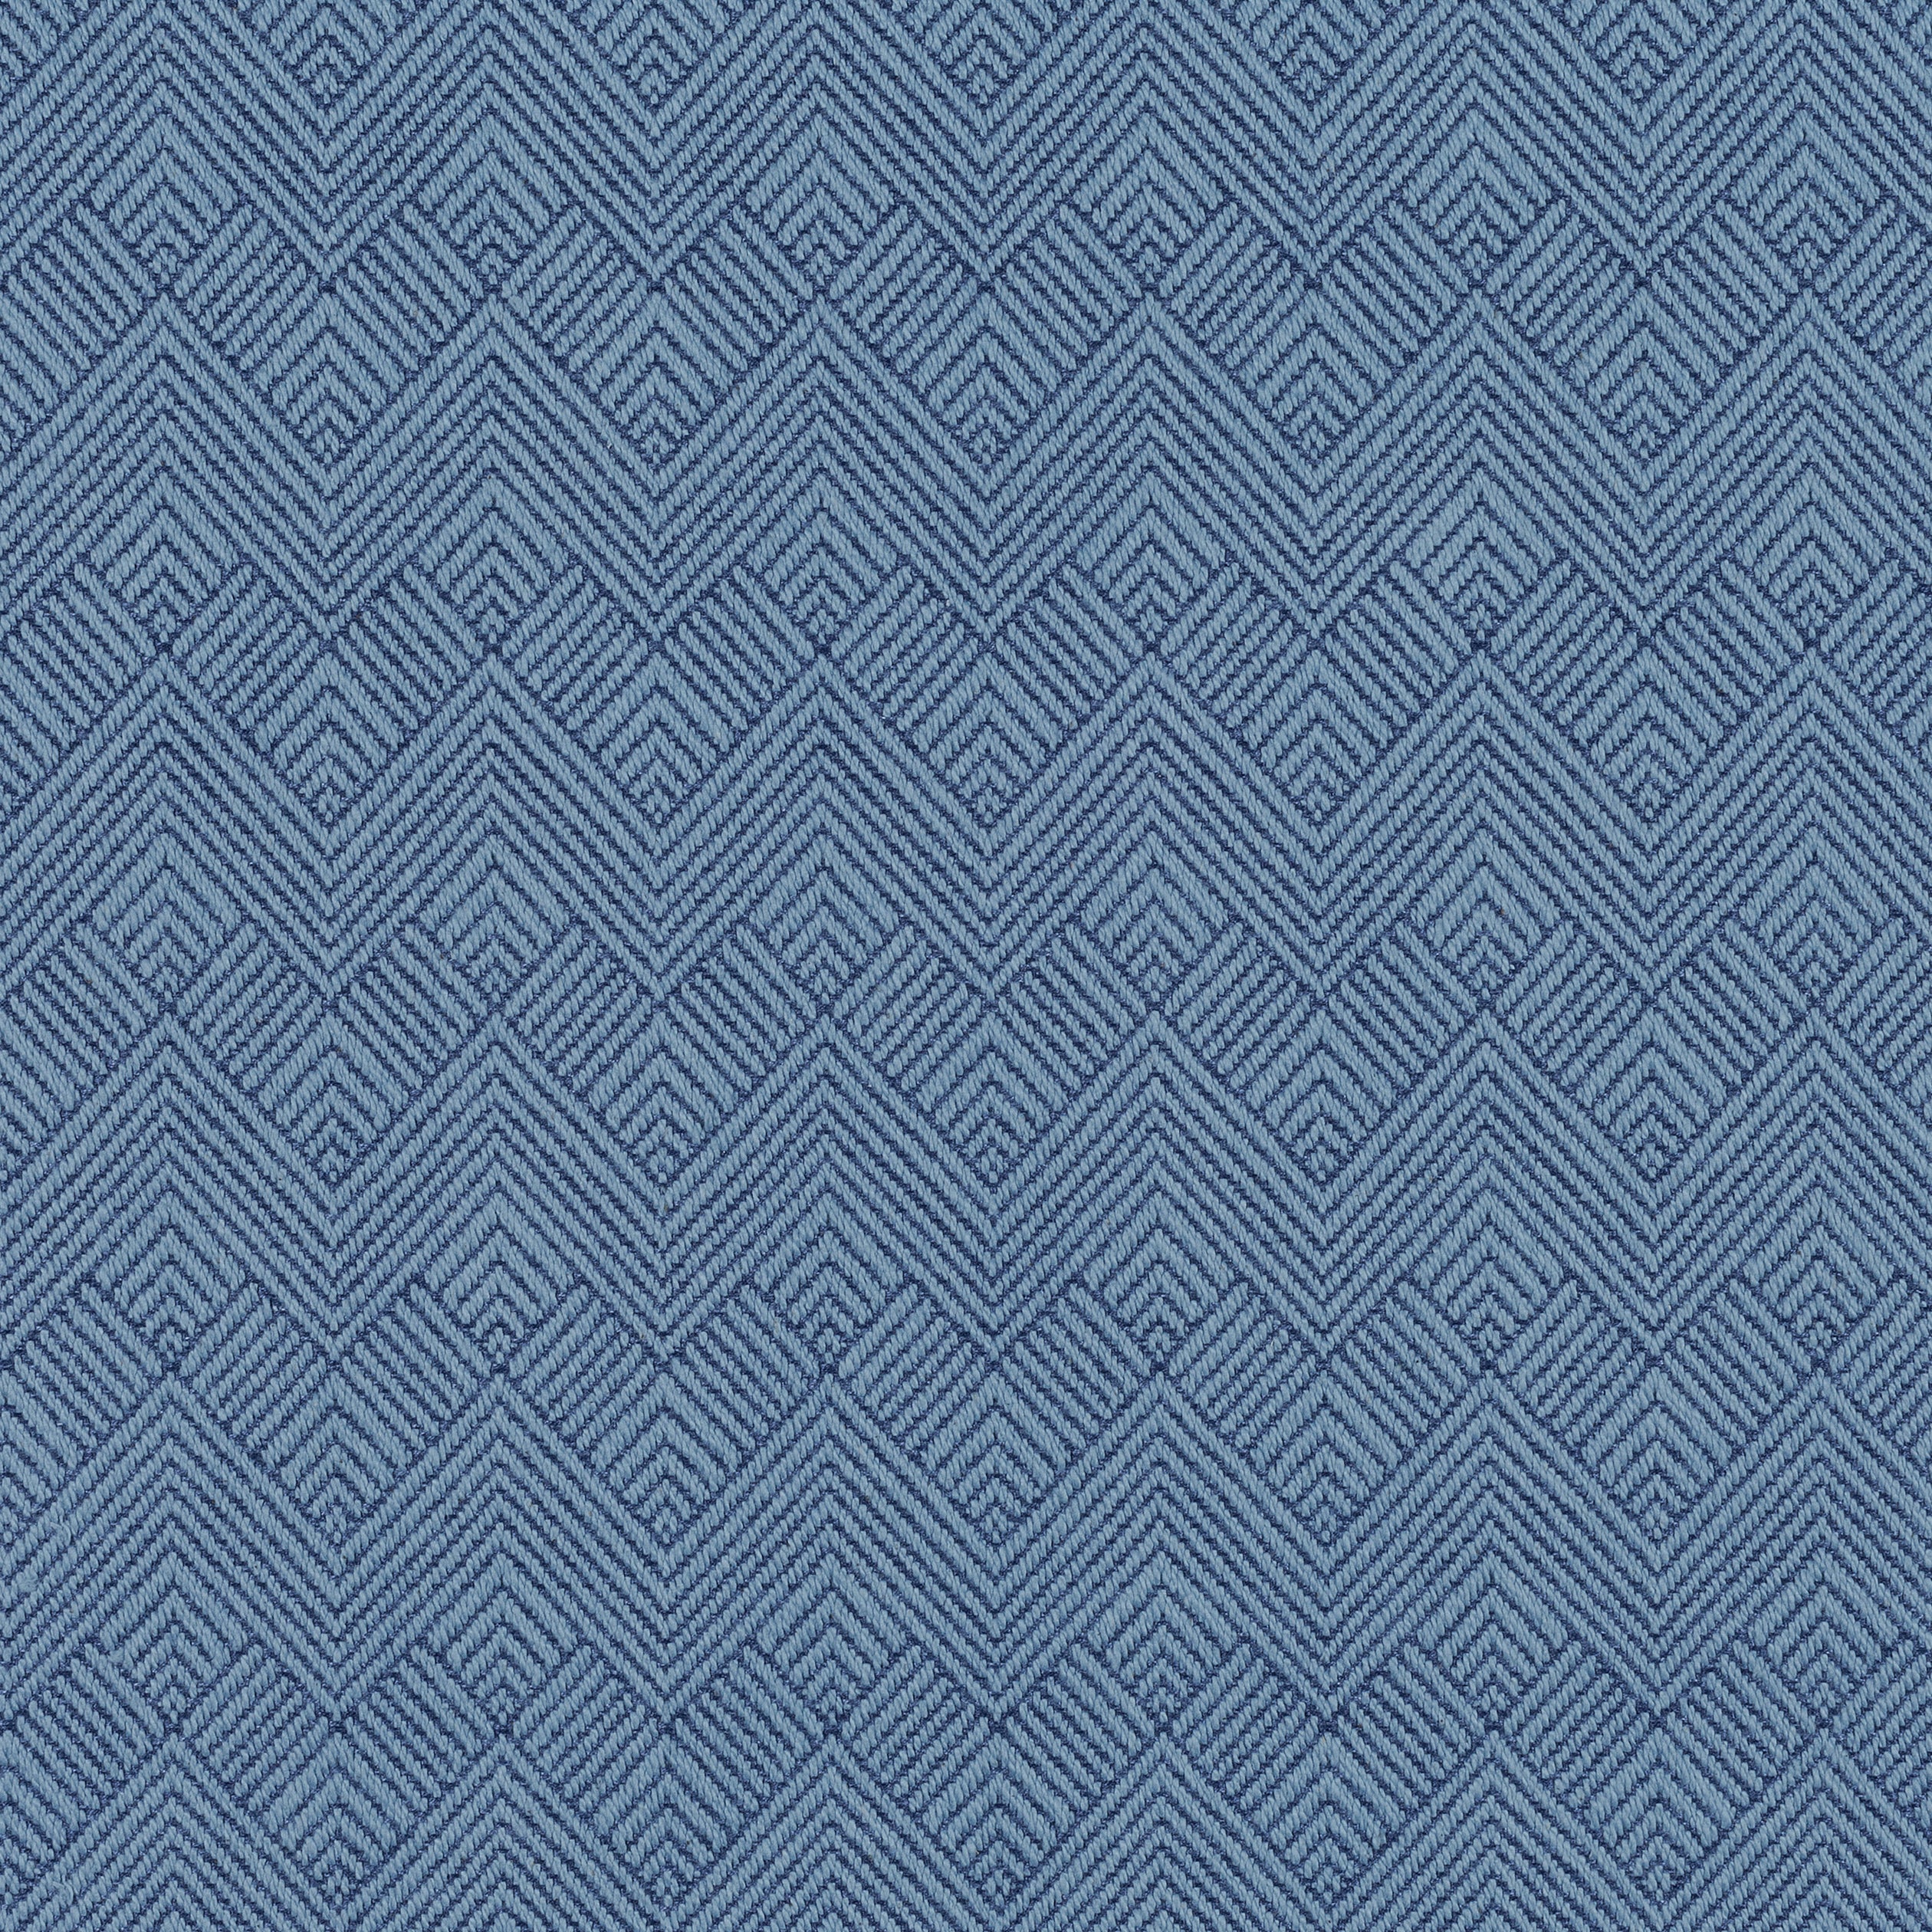 Maddox fabric in true blue color - pattern number W73337 - by Thibaut in the Nomad collection